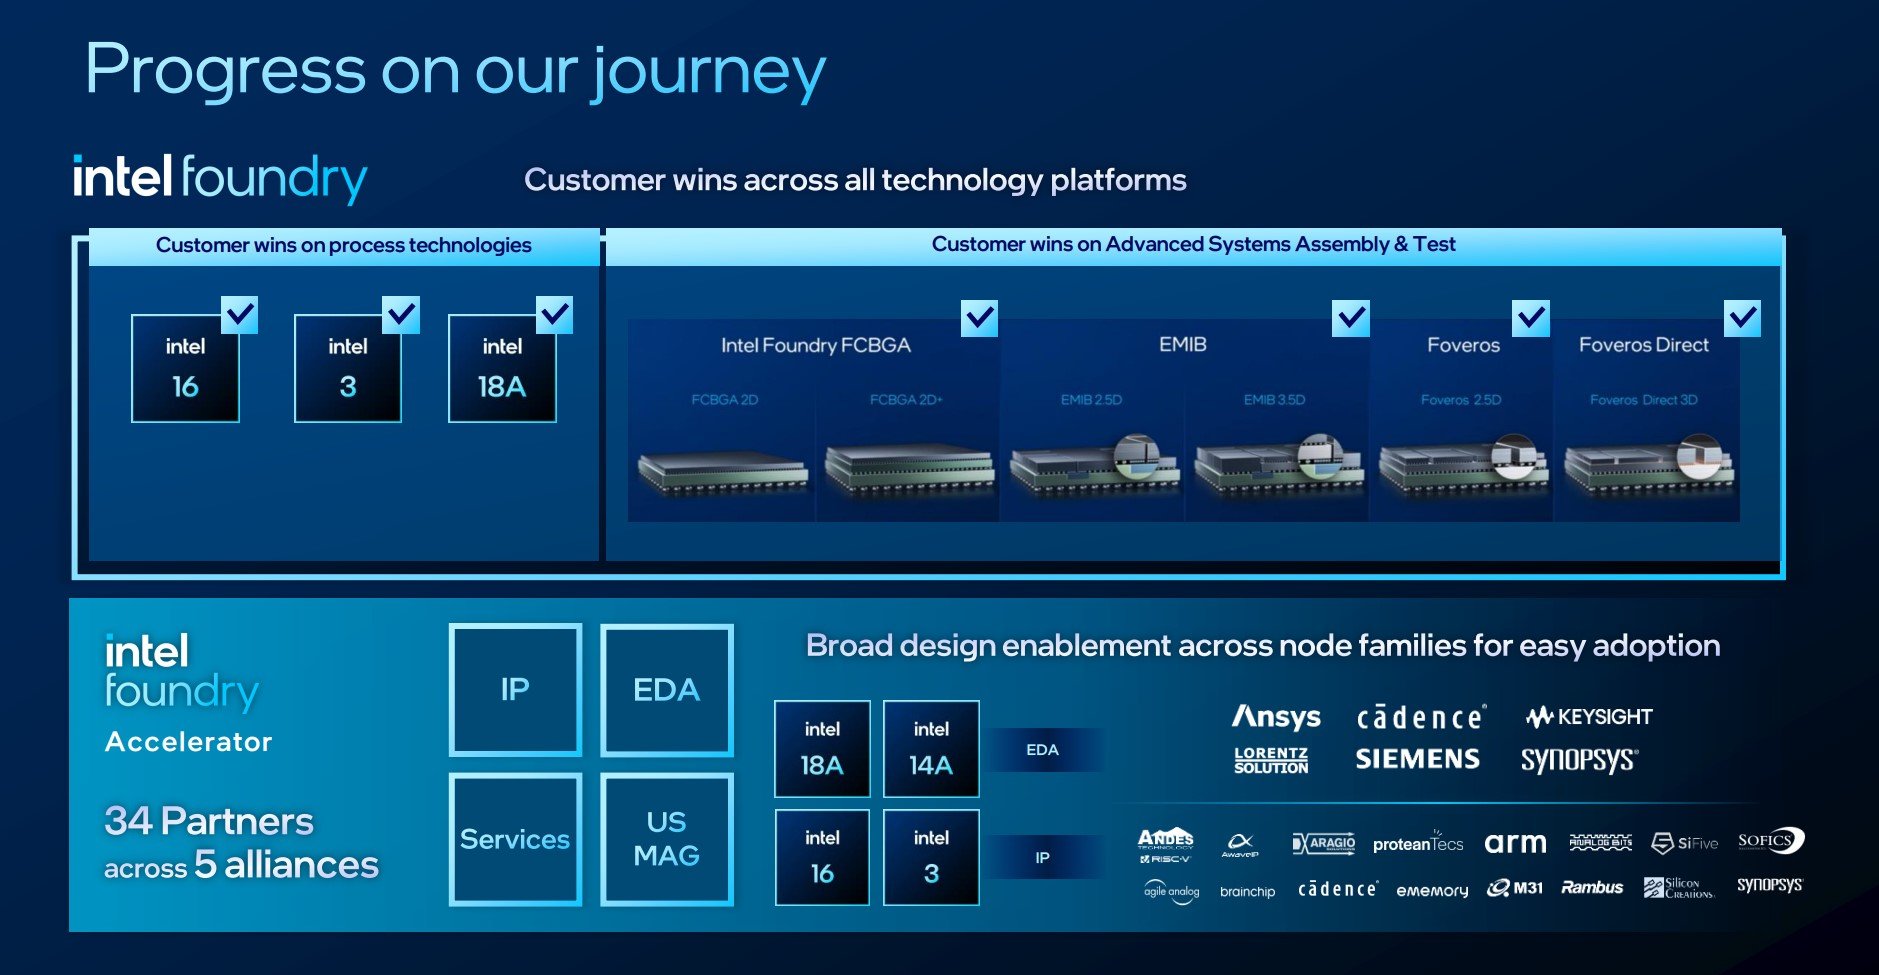 Intel Foundry is open to all customers, be they Intel or someone else.